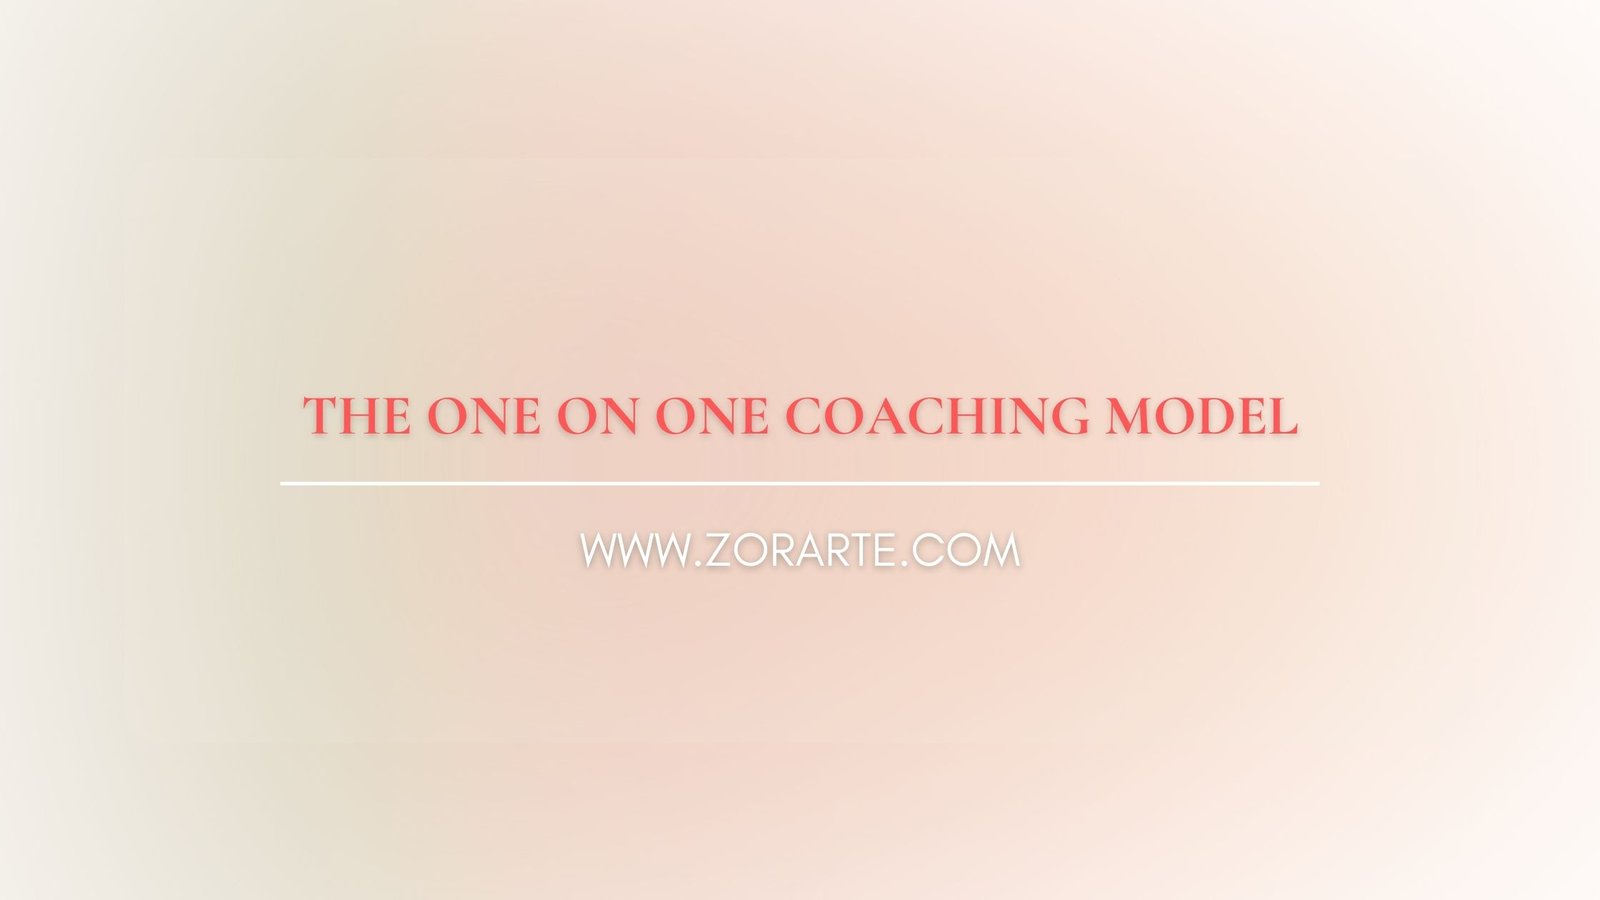 The One on One Coaching Model